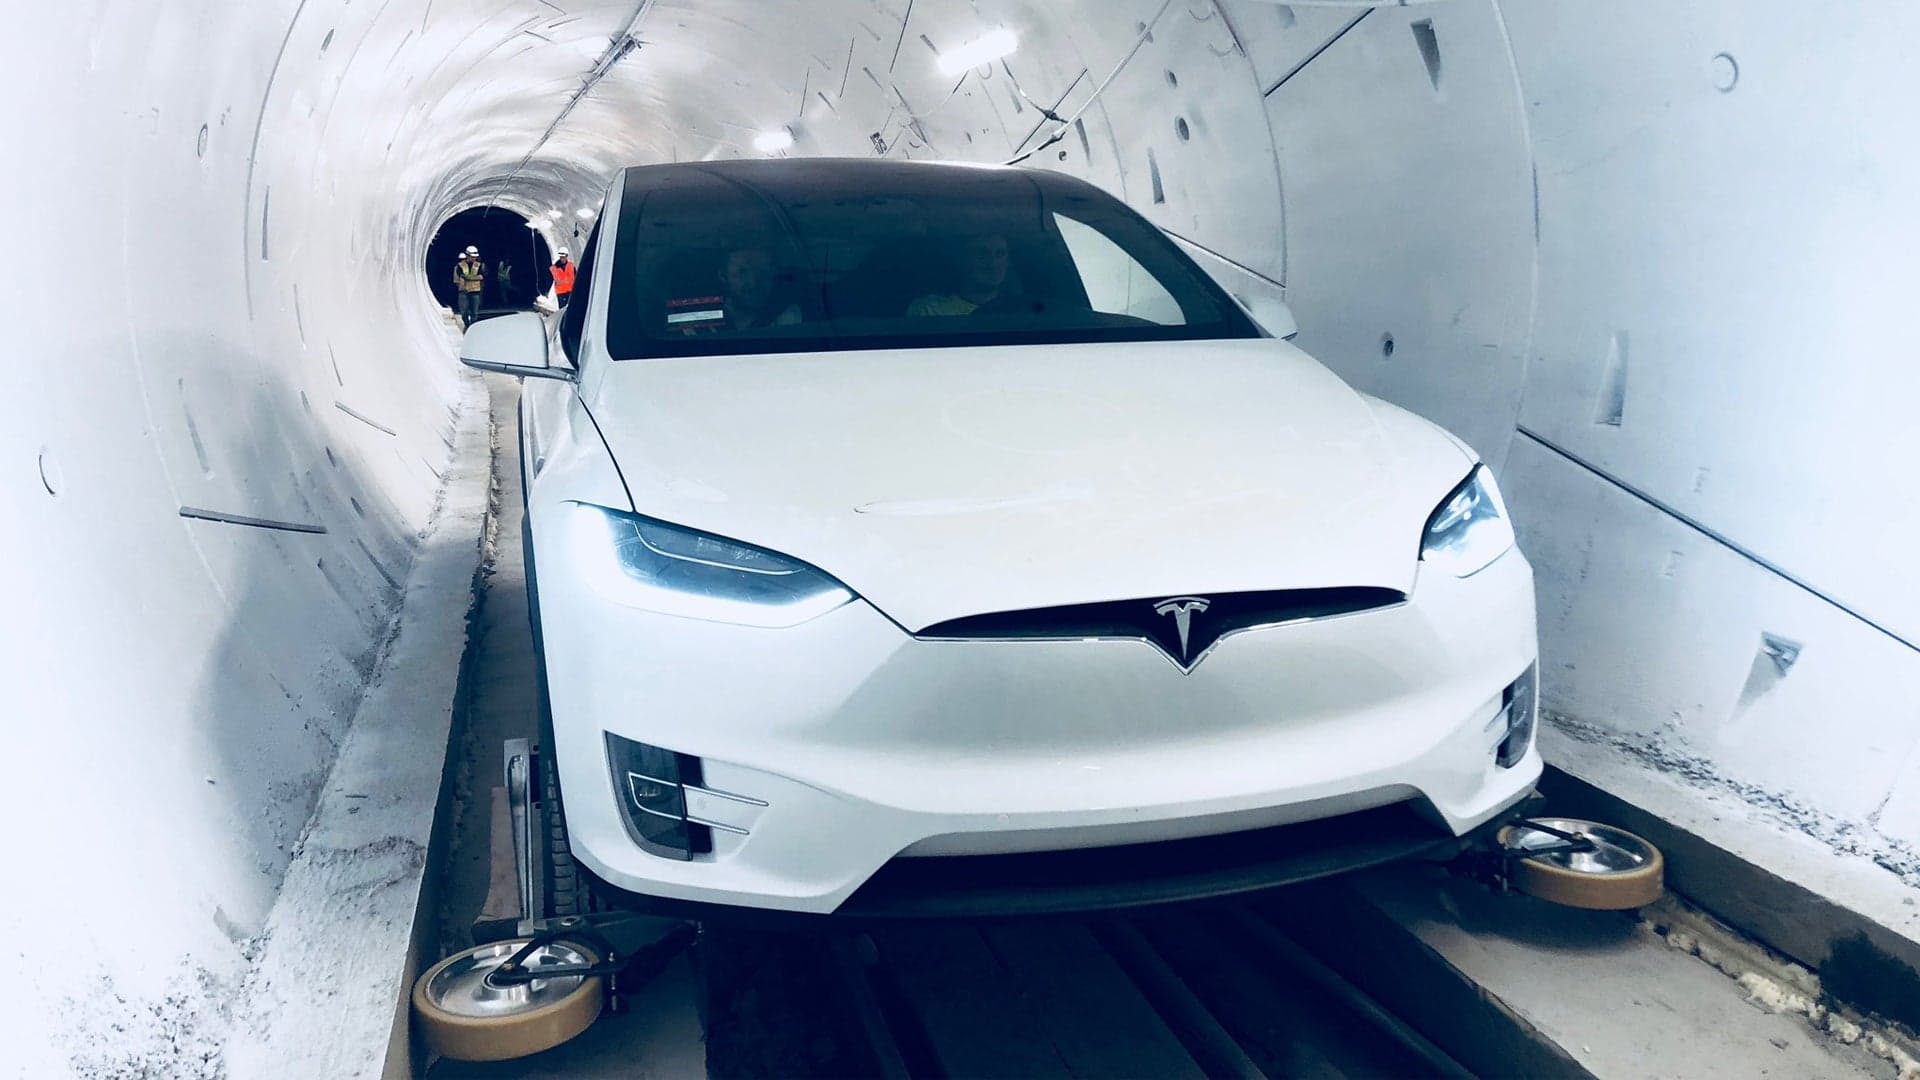 Take a High-Speed Ride in Elon Musk’s Boring Company Underground Tunnel